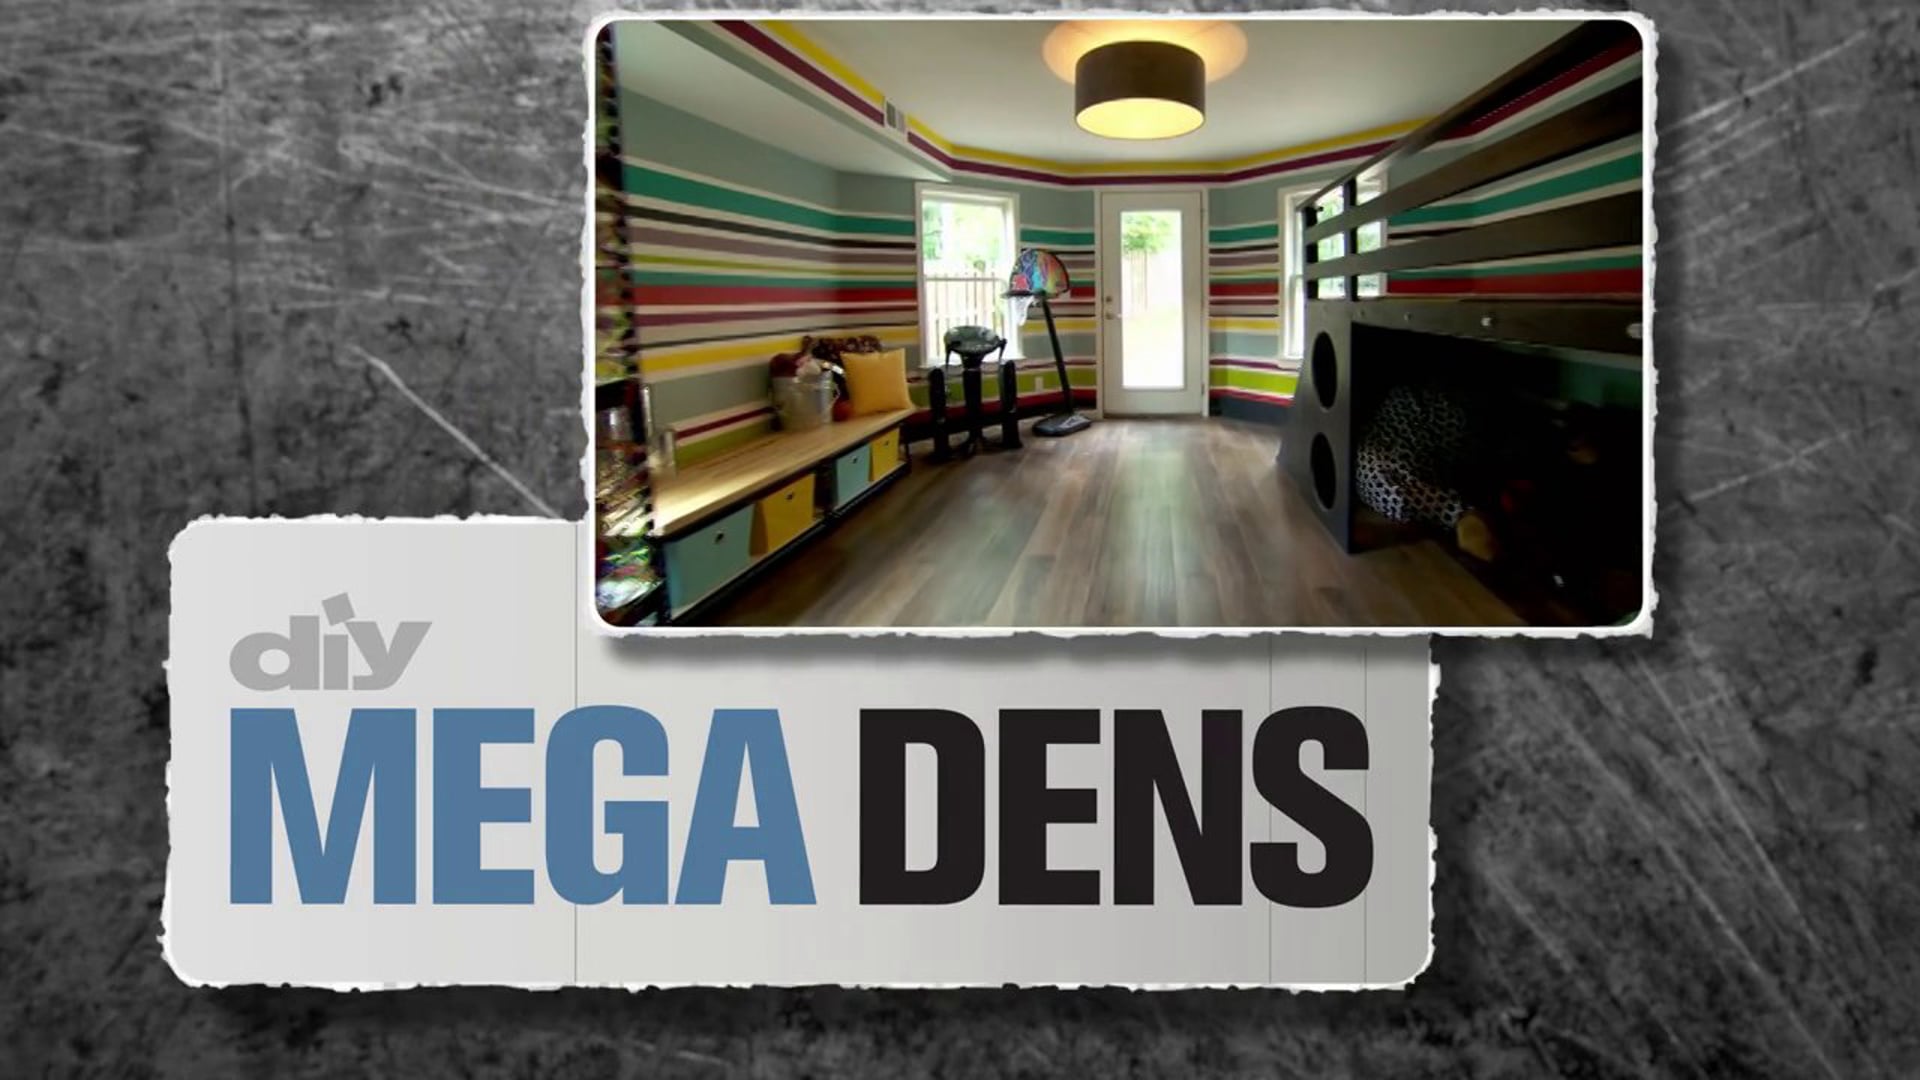 DIY MegaDens Open1 (2013) Visual Effects by Jose A. Acosta for Picture Window.